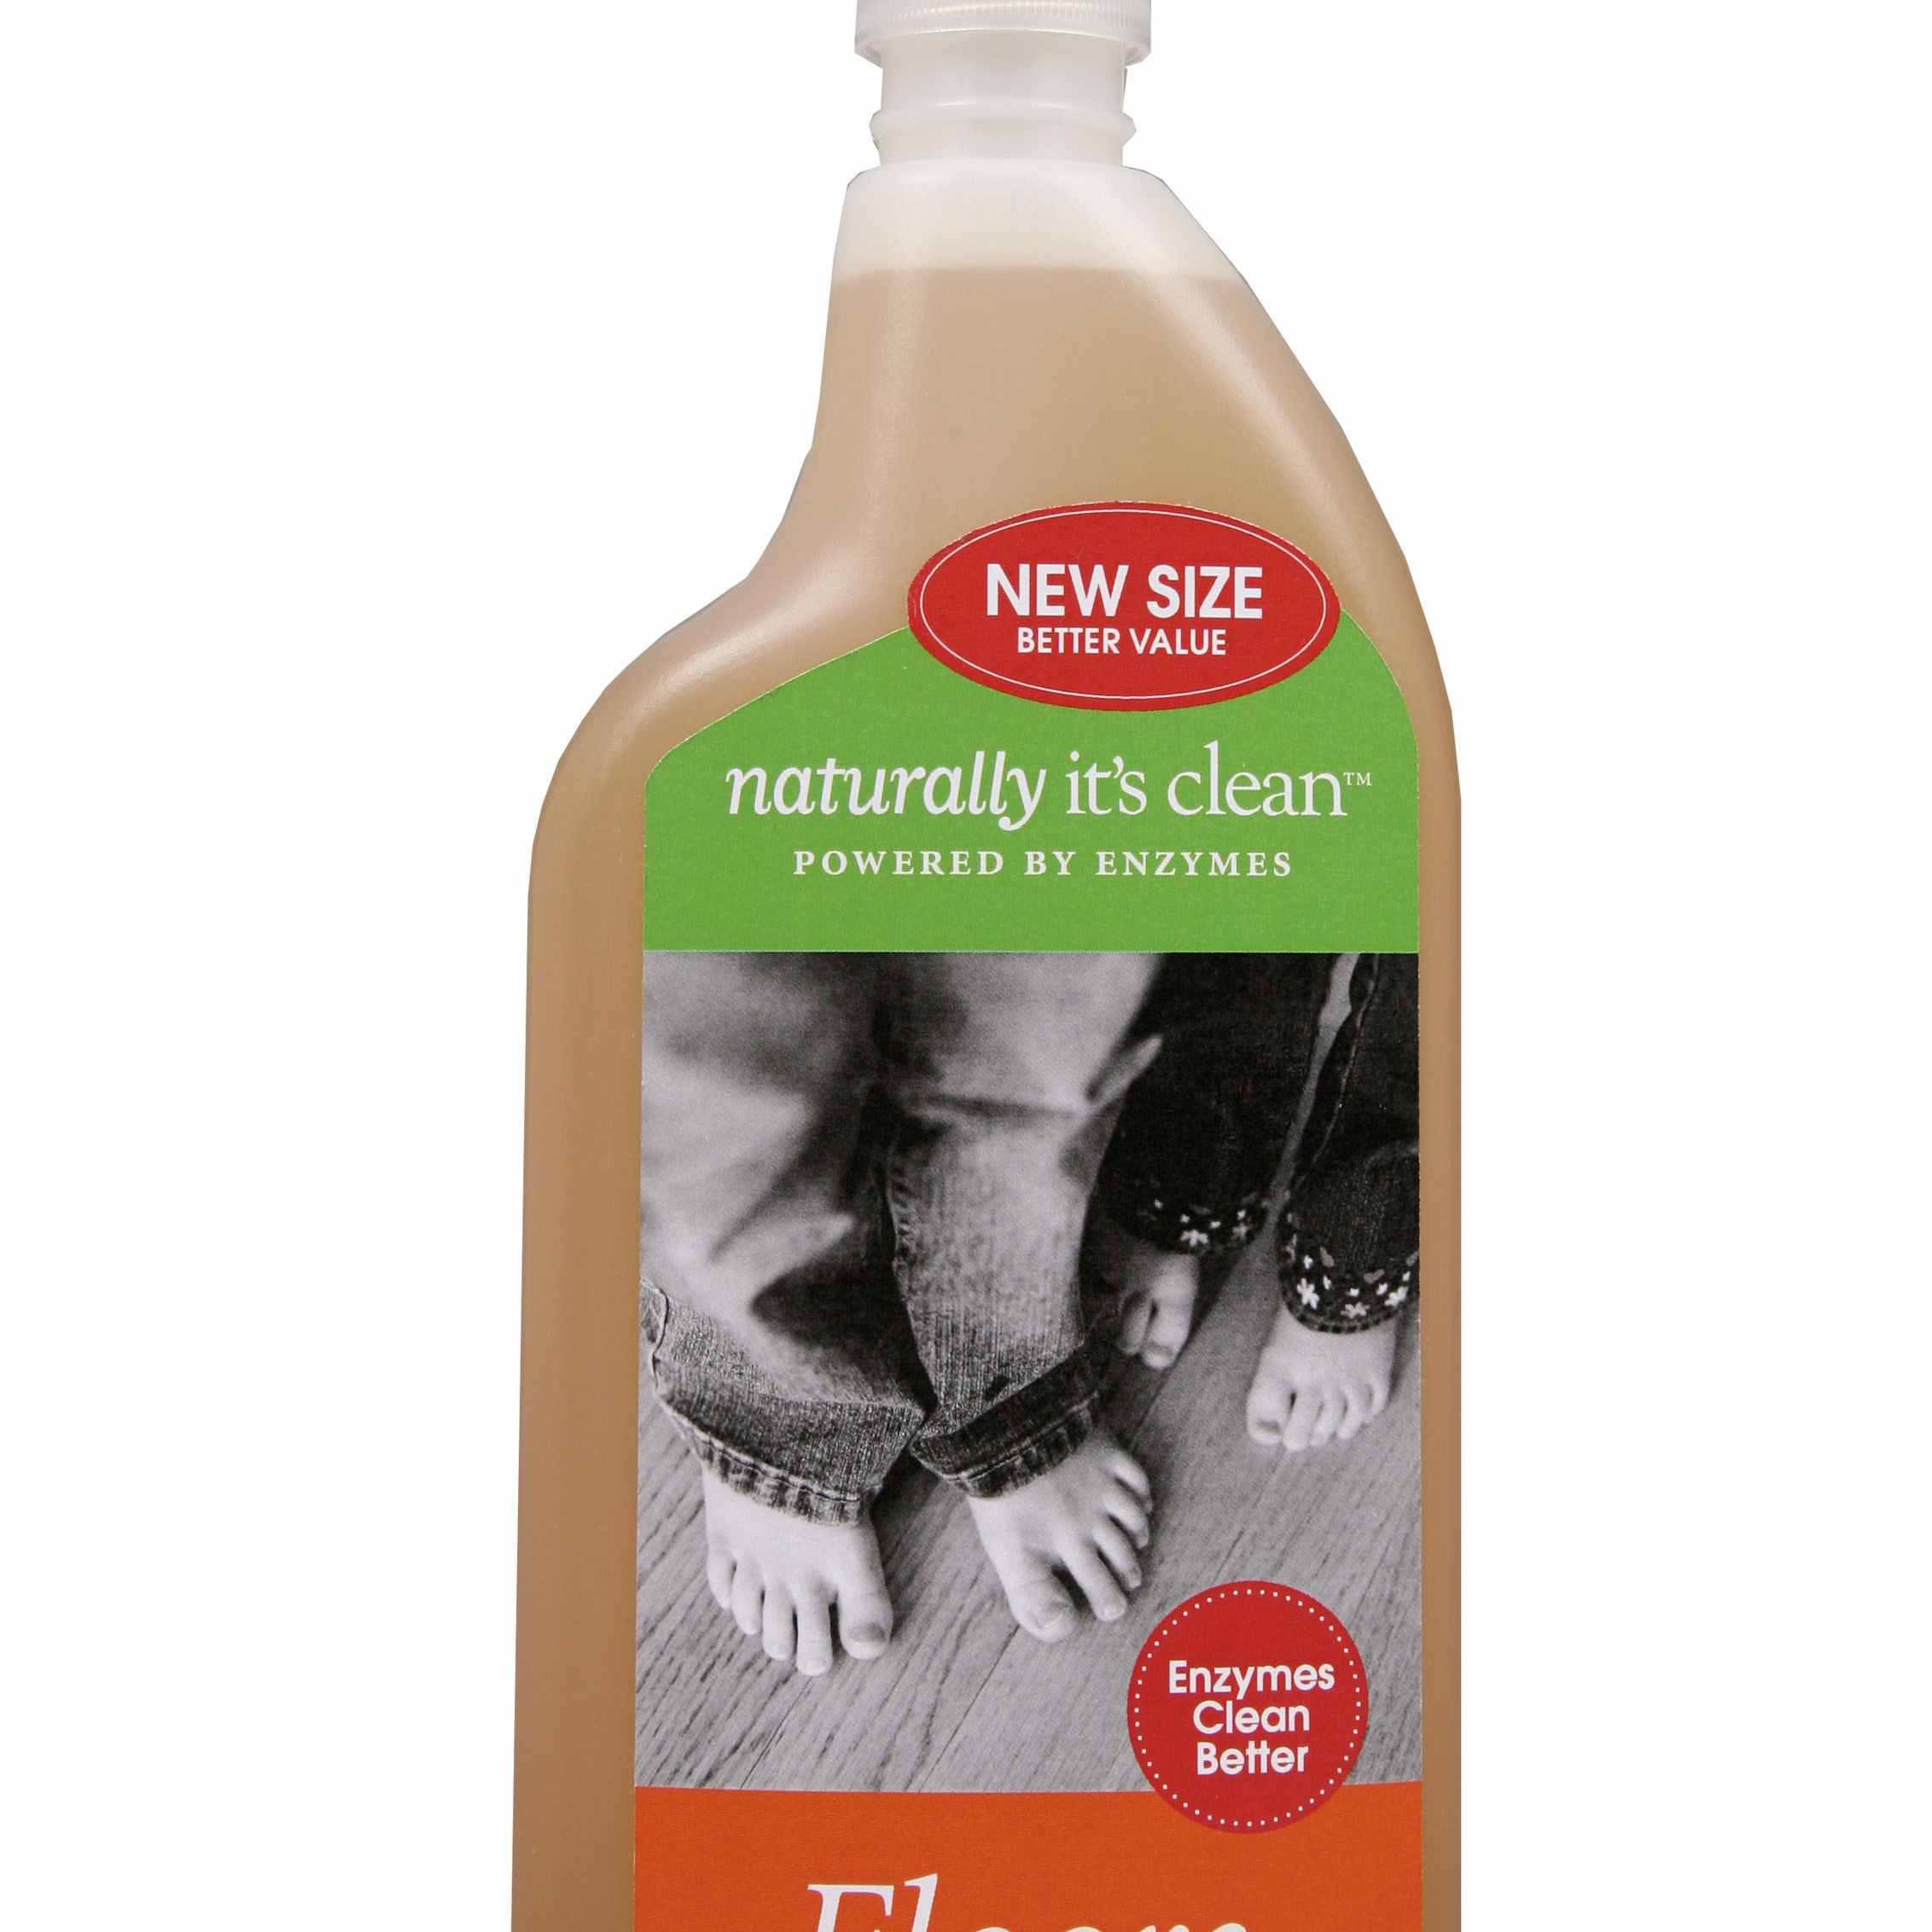 22 Fabulous Hardwood Floor Cleaner Canada 2024 free download hardwood floor cleaner canada of adore your wood floors with these eco friendly cleaners for naturally its clean floors